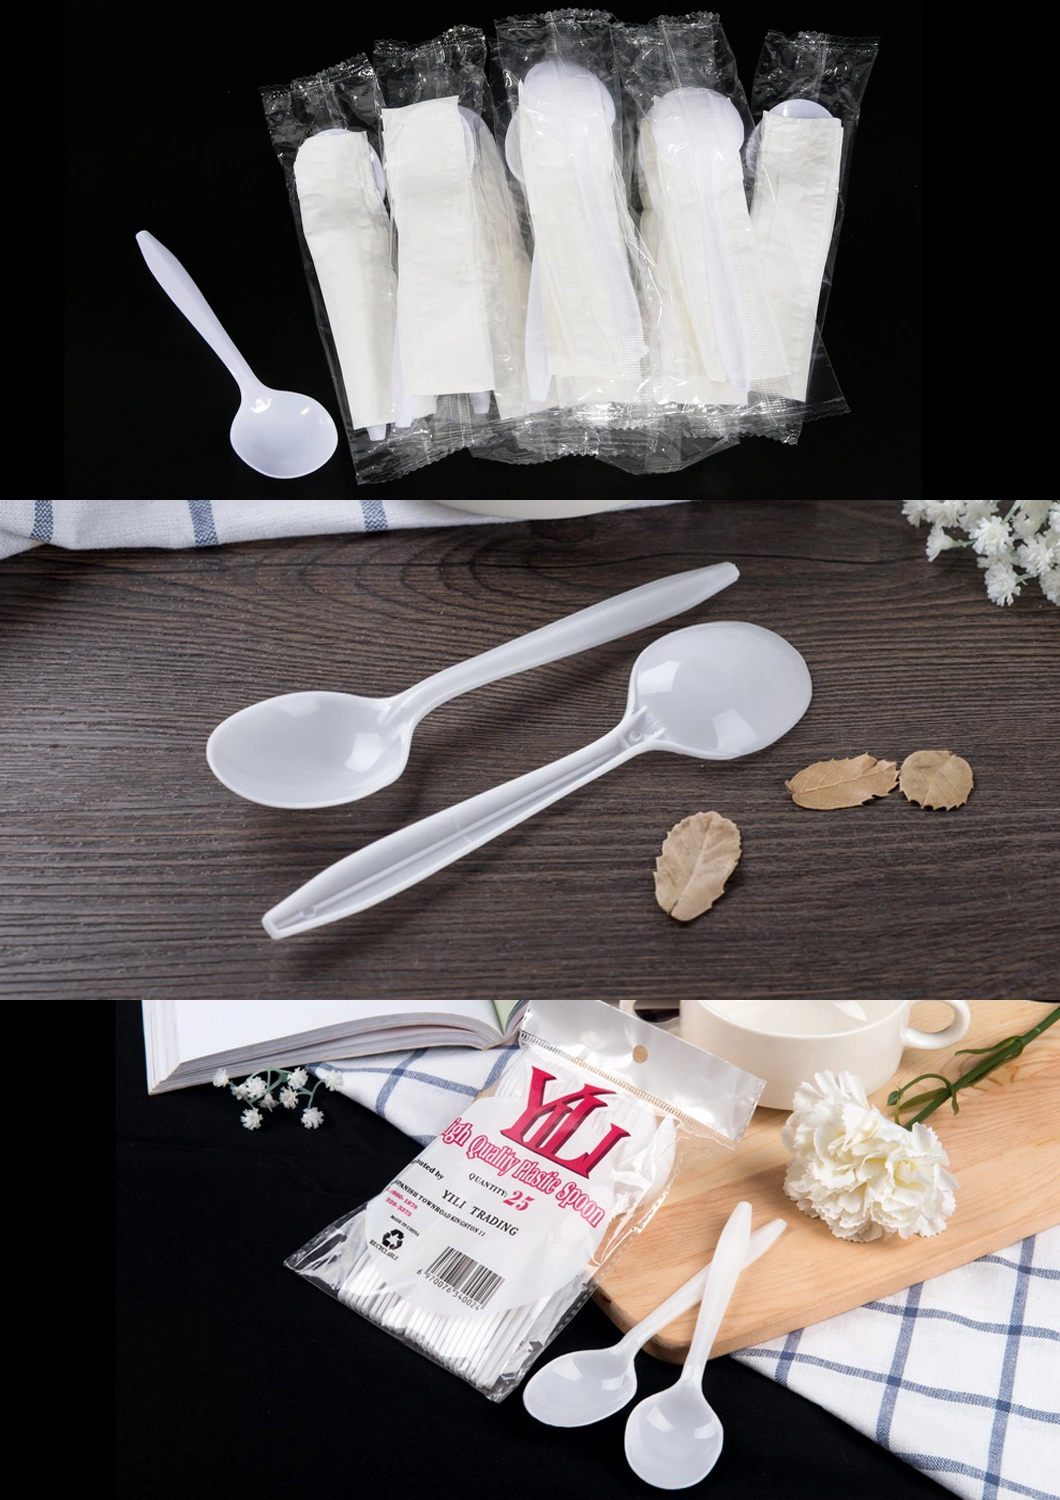 Hot Sale PP Material Plastic Disposable Cutlery Set Dinnerware Tableware Knife Fork Spoon and Cup